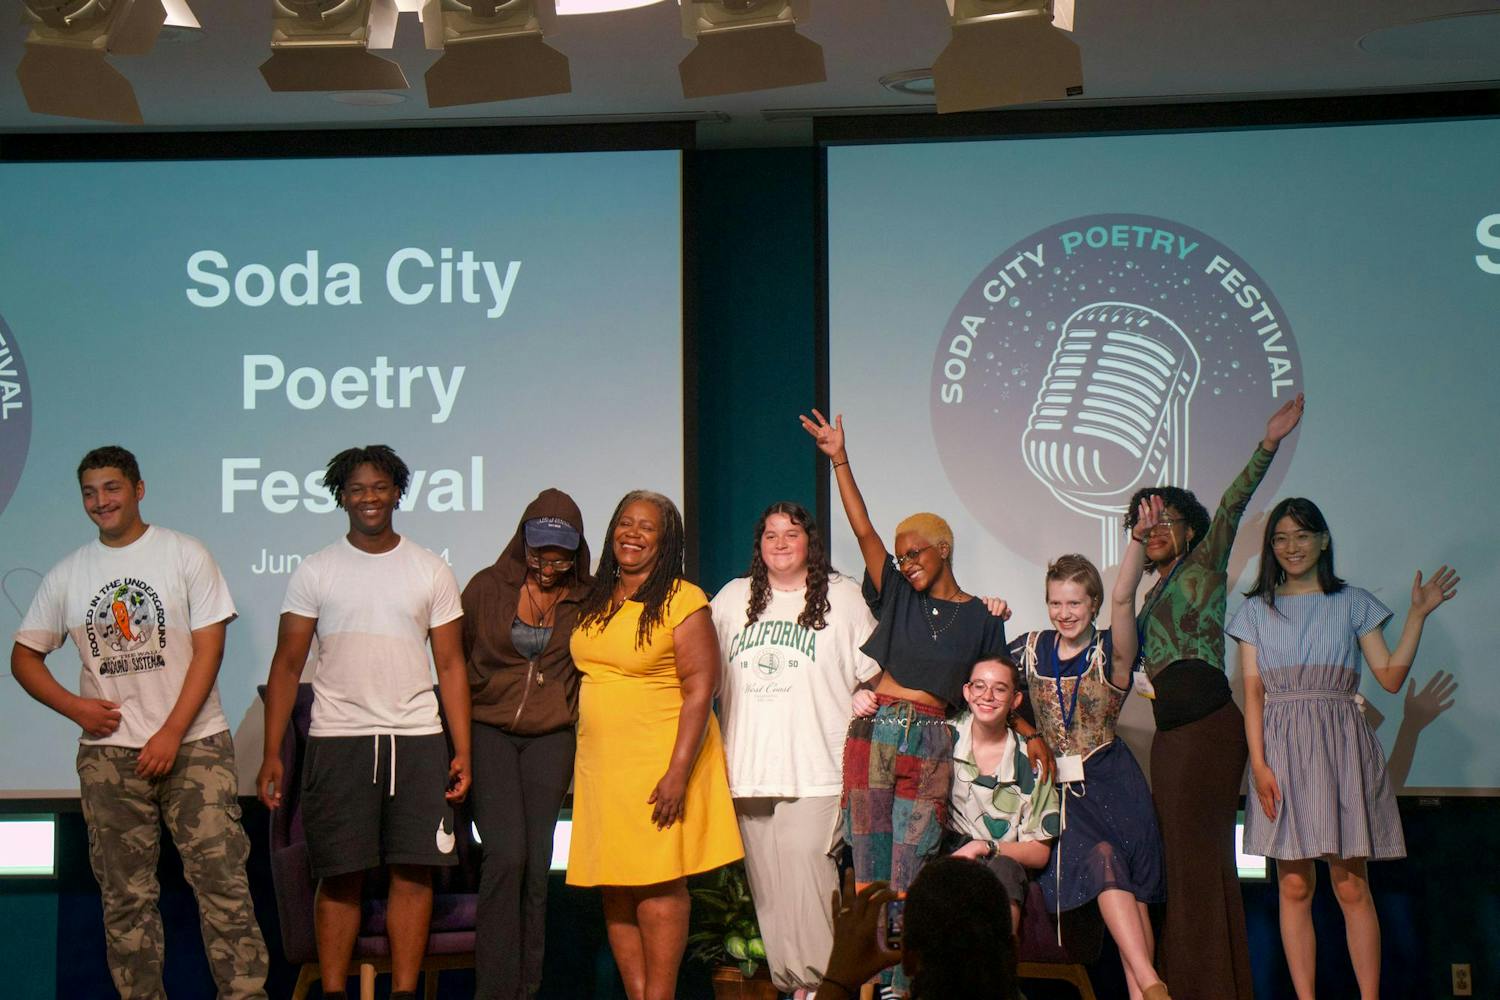 Participants of the teen poetry showcase at the inaugural Soda City Poetry Festival gather on stage for a group photo on June 22, 2024. Participants shared original works with an audience of their family members, peers, and festival attendees.